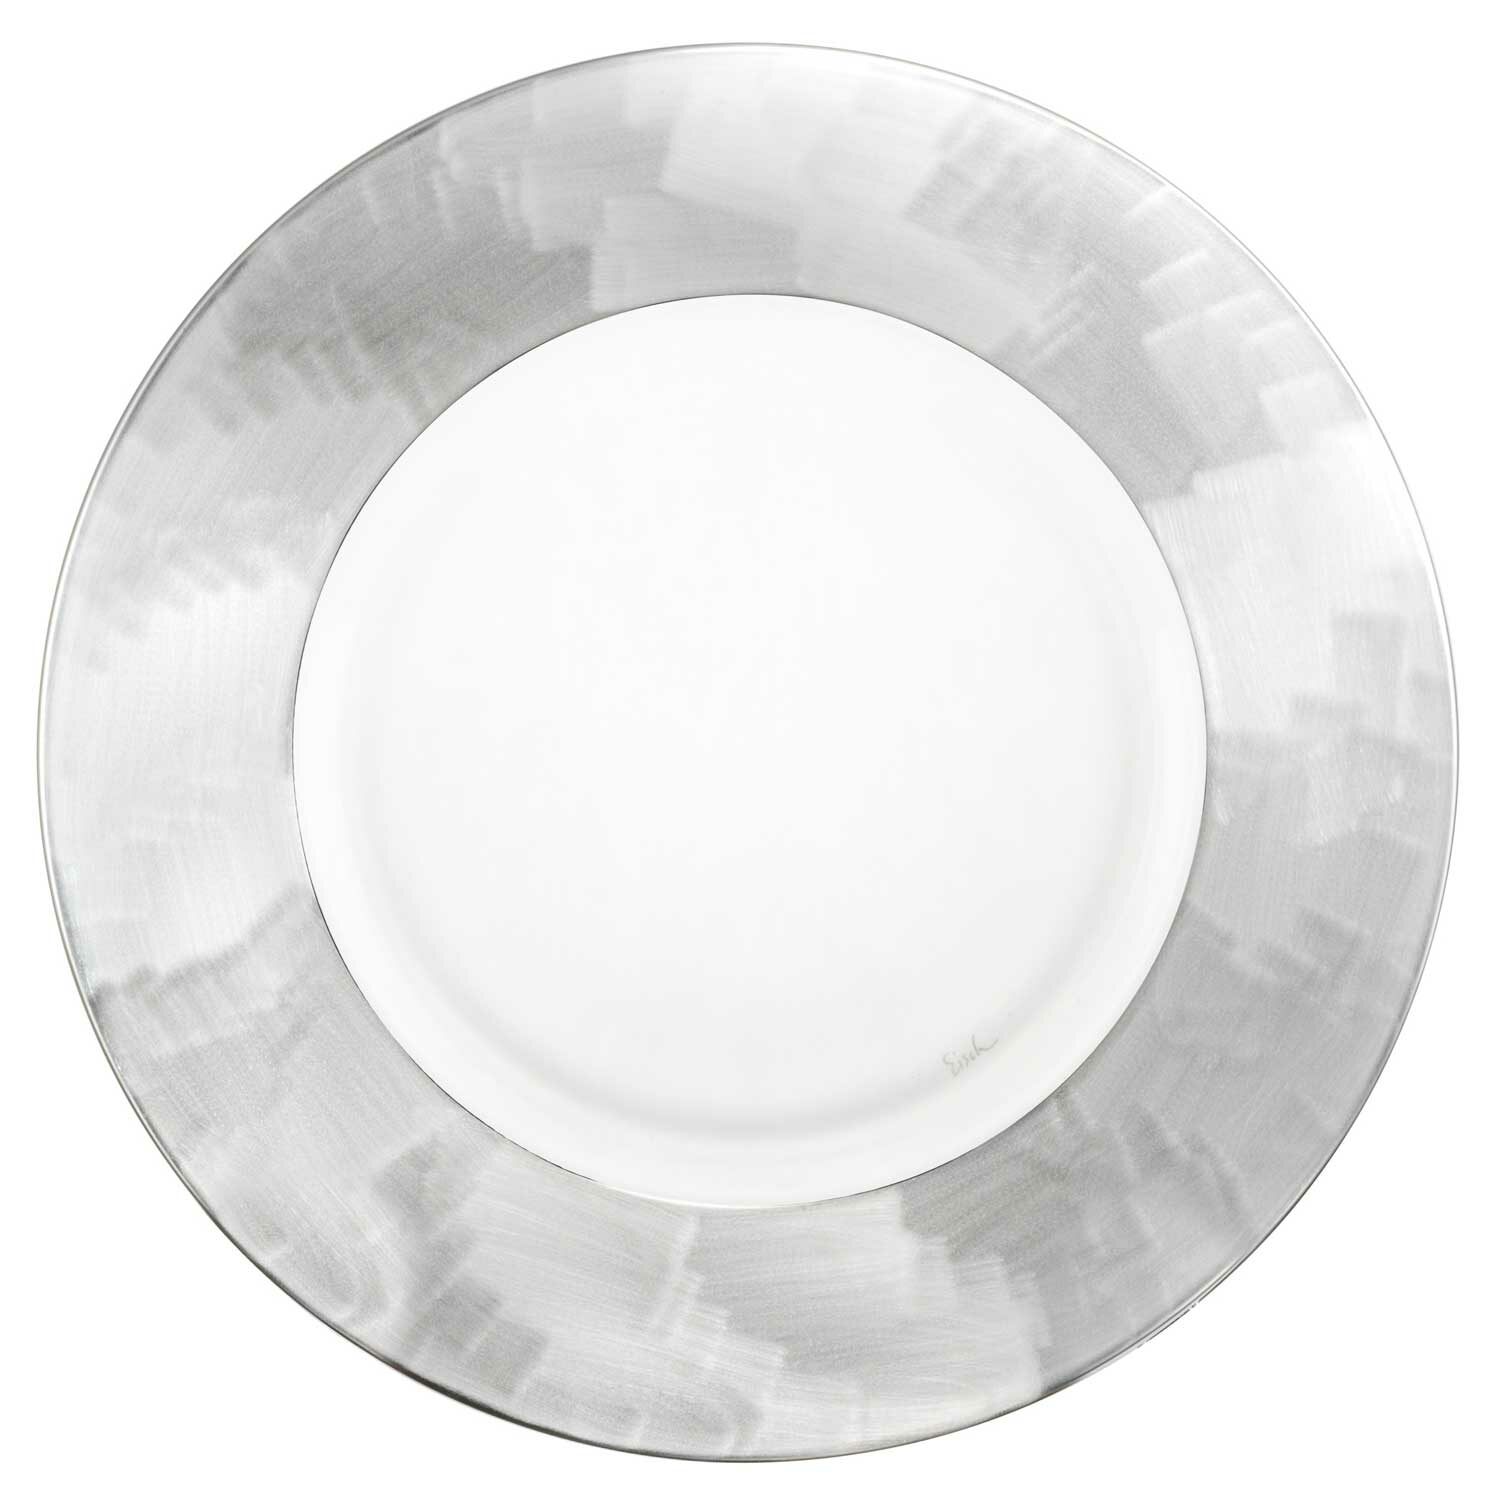 PURO crystal glass plate 22 cm with real silver